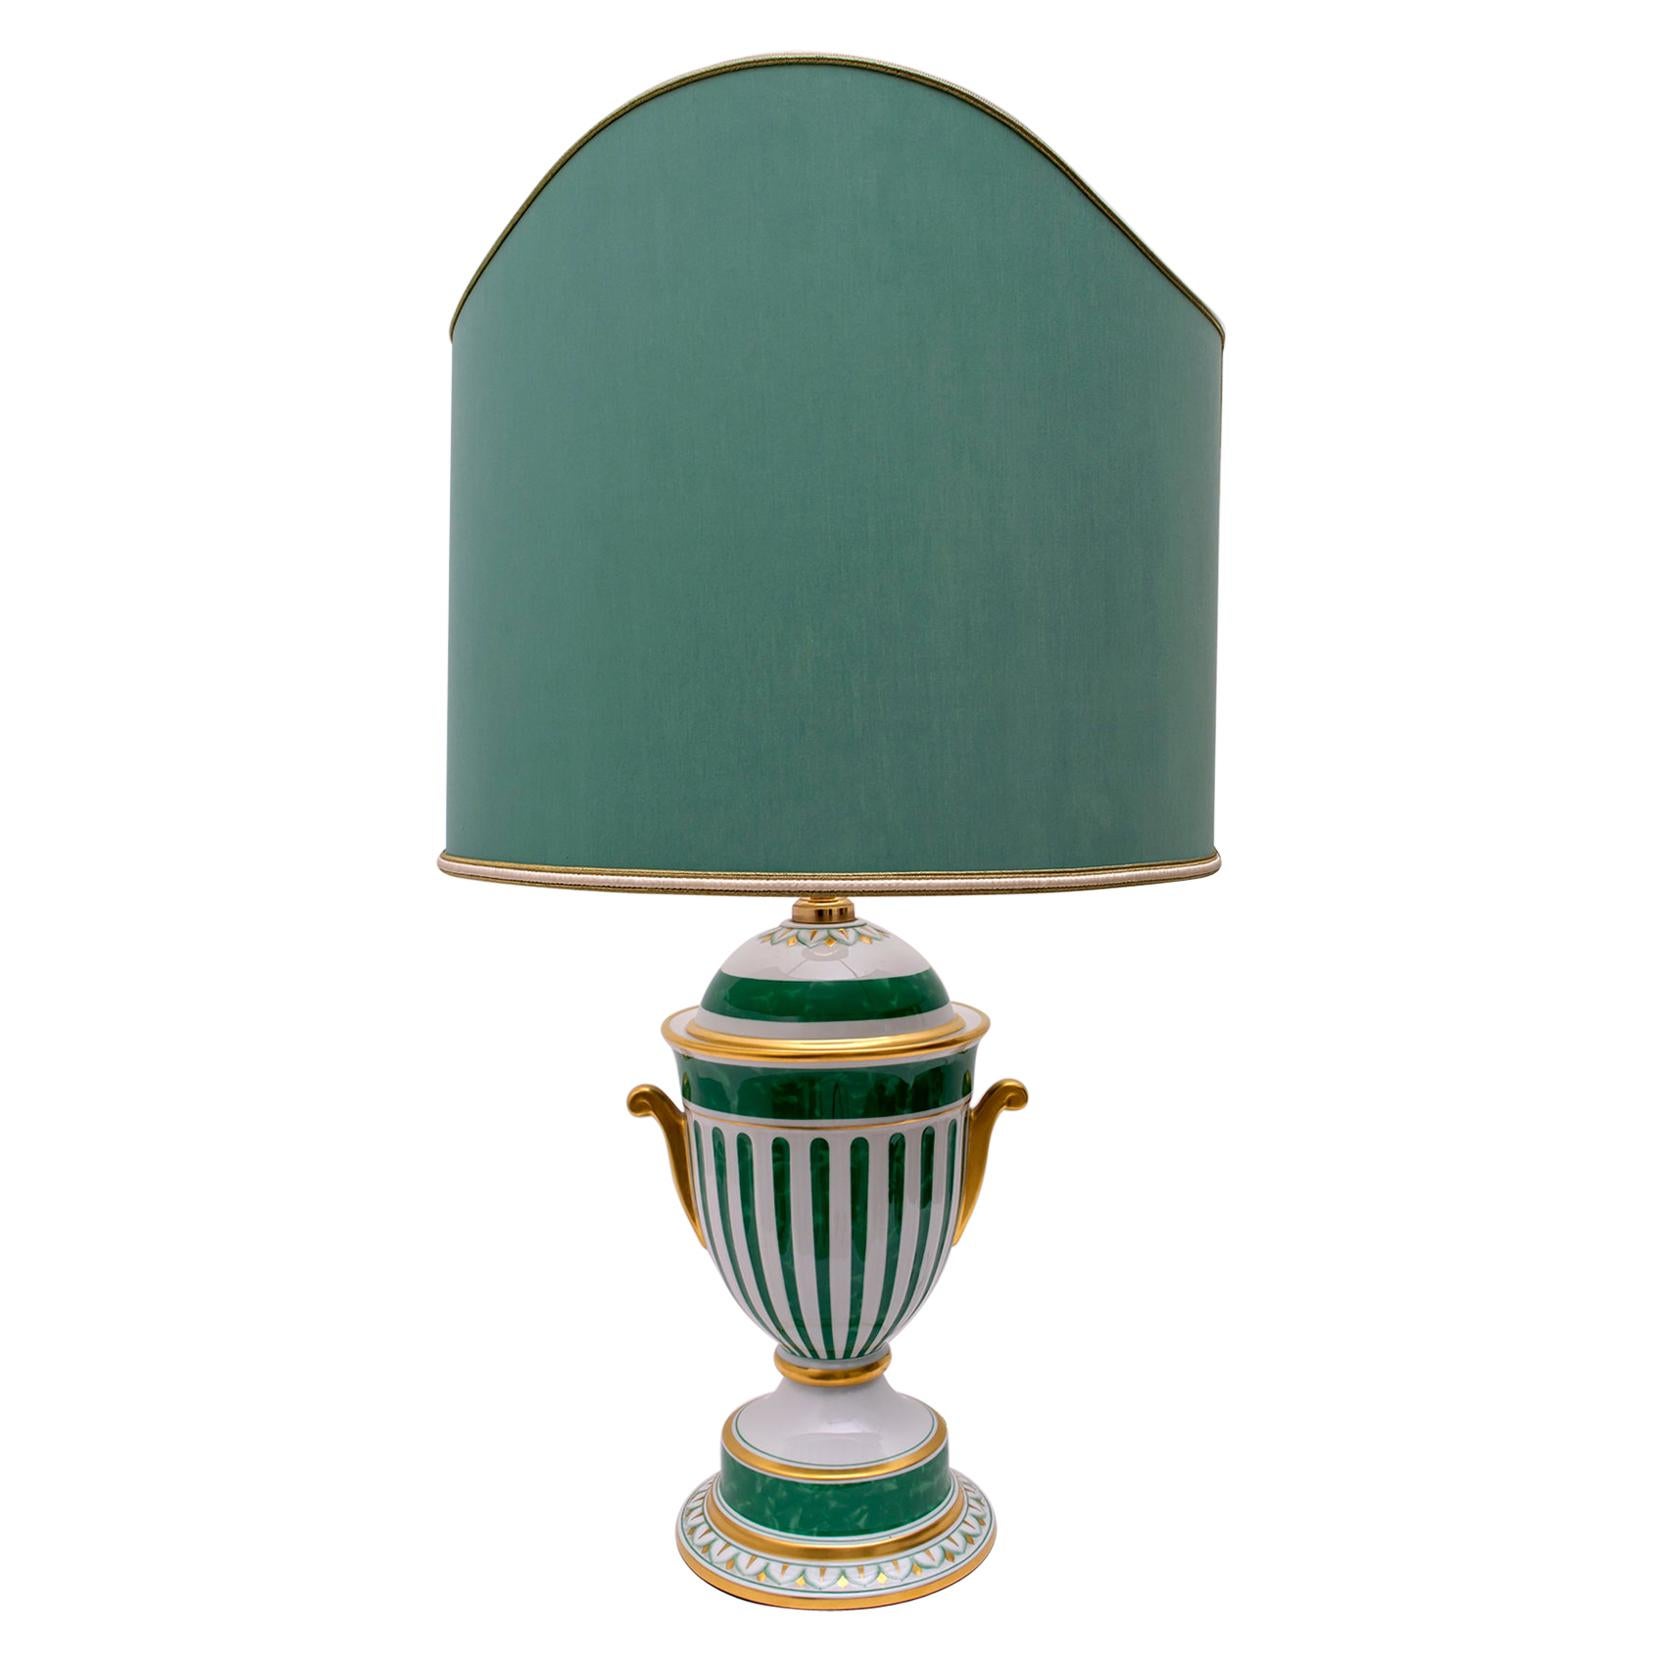 Manifattura Artistica Le Porcellane Italian Gold-Plated Table Lamp Hand Painted